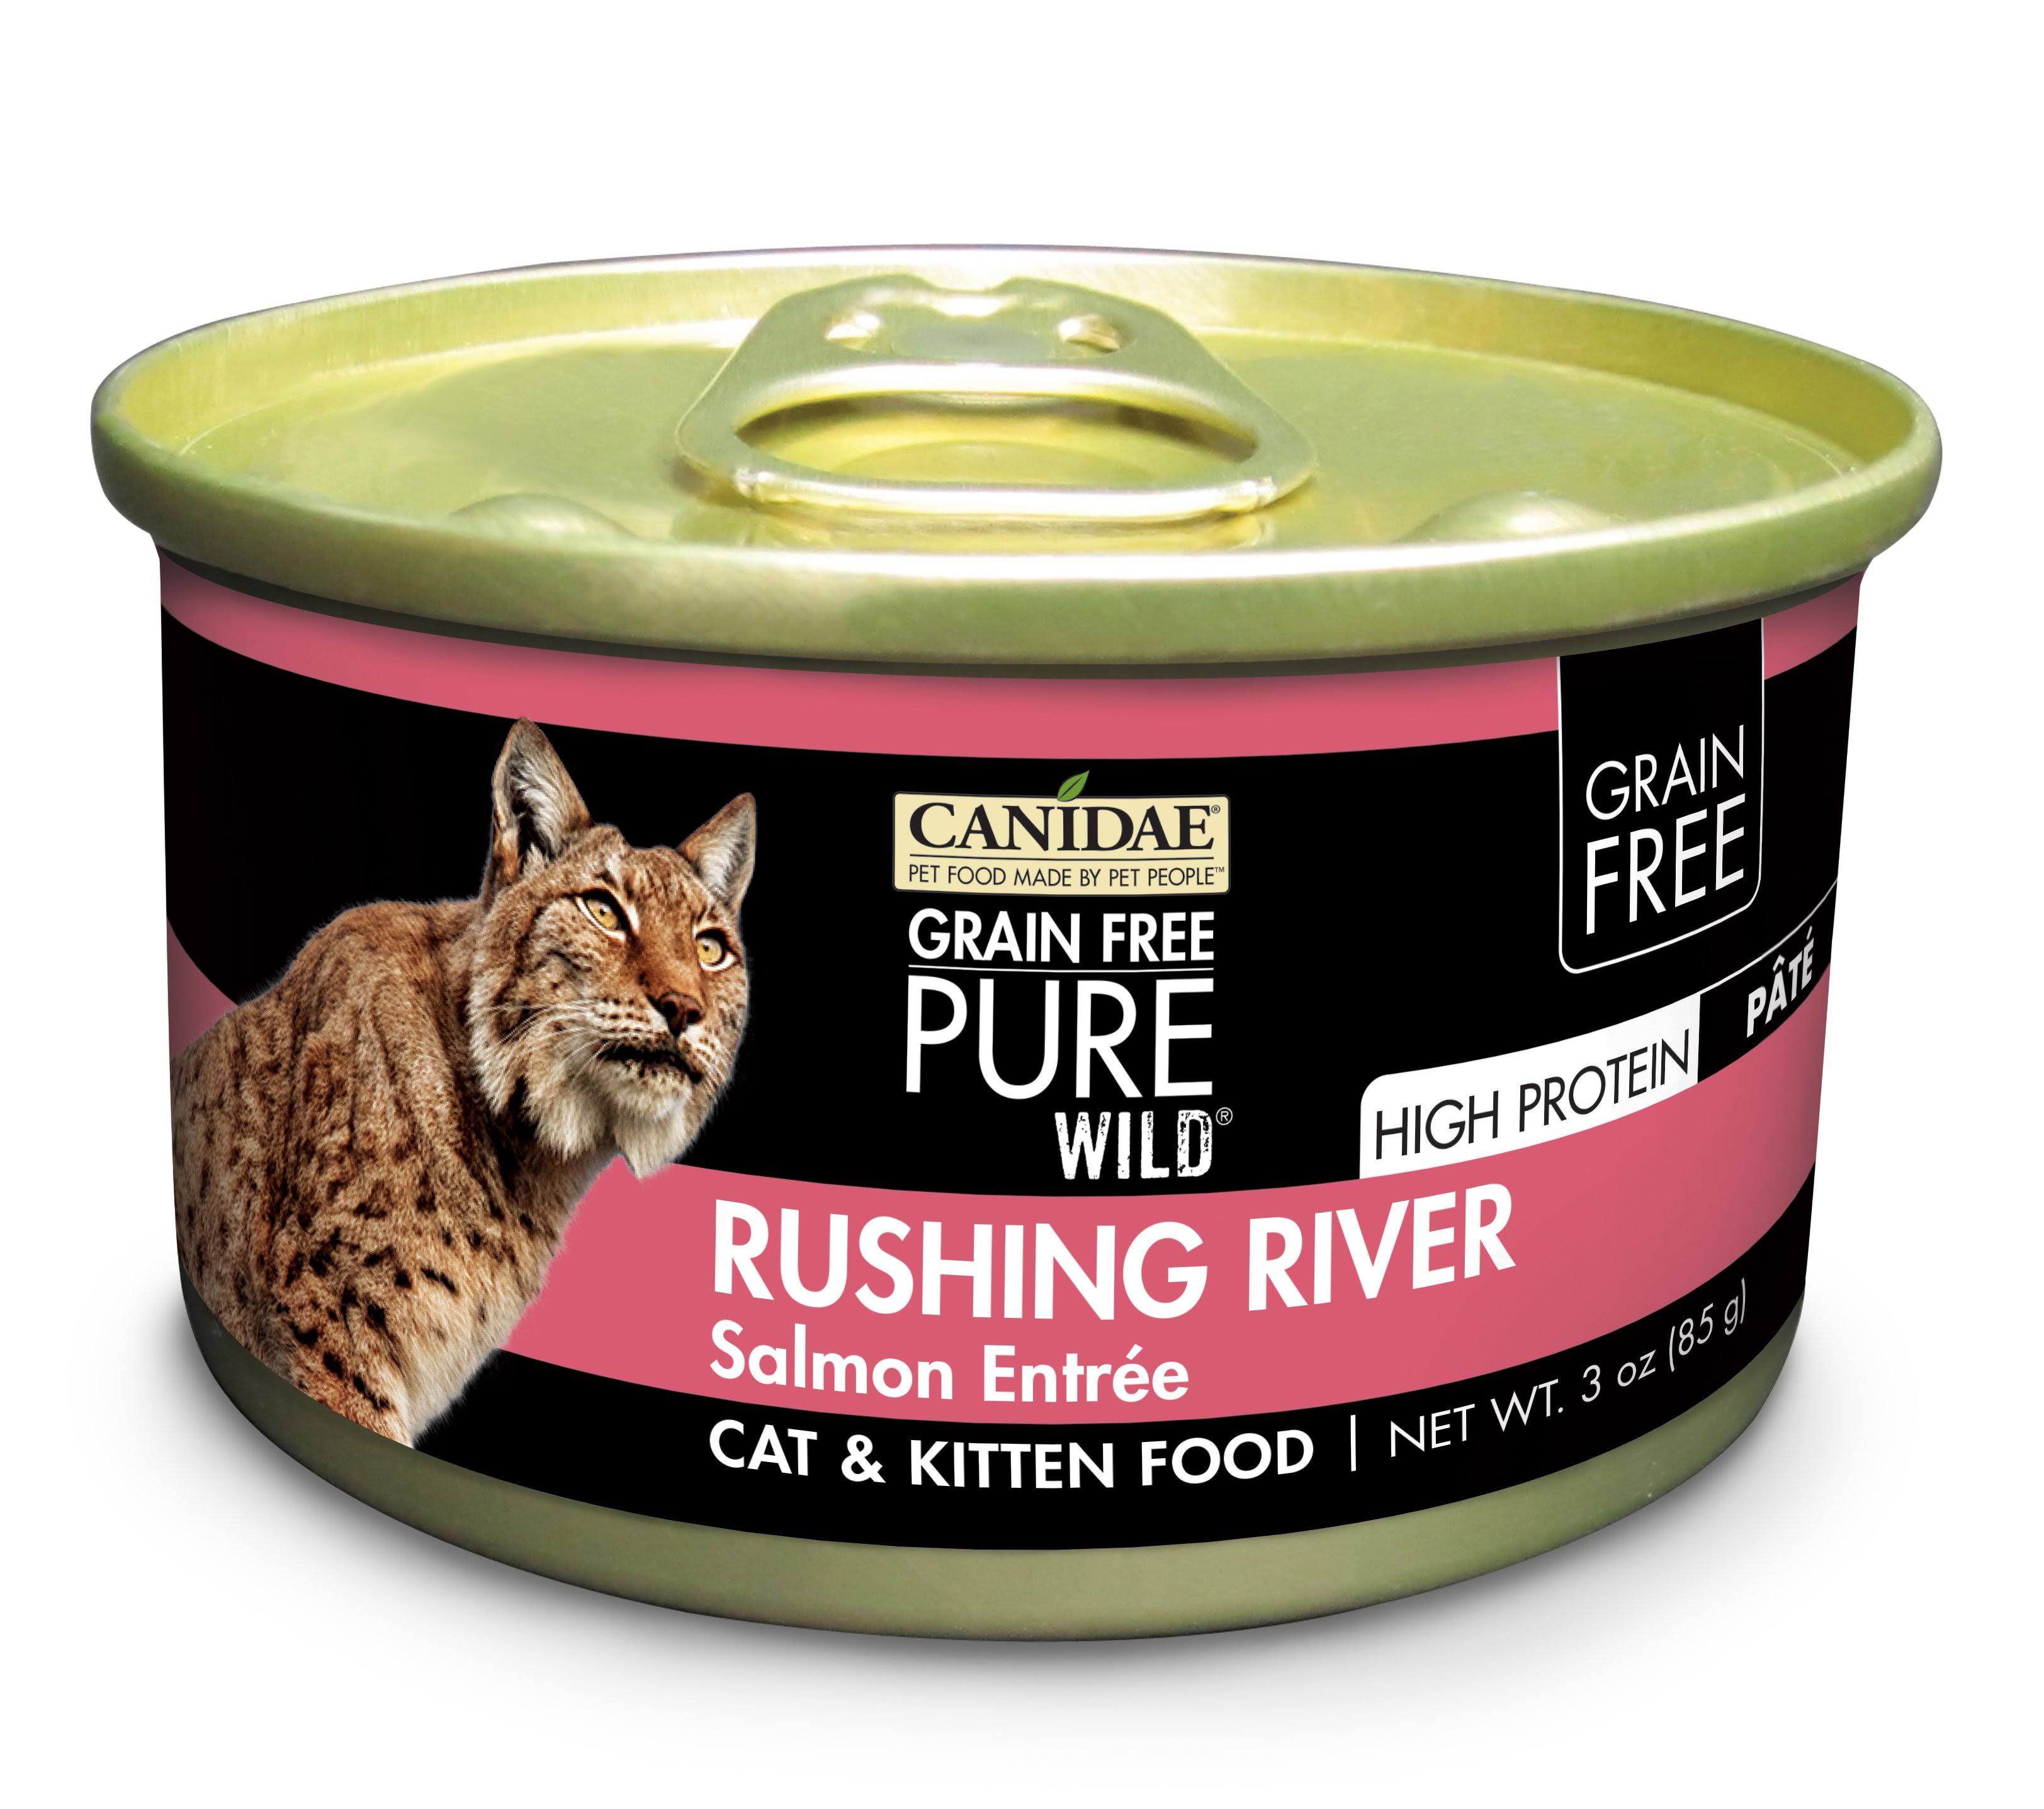 Canidae GF Pure Wild Rushing River River Salmon Entree Cat Food - 3oz